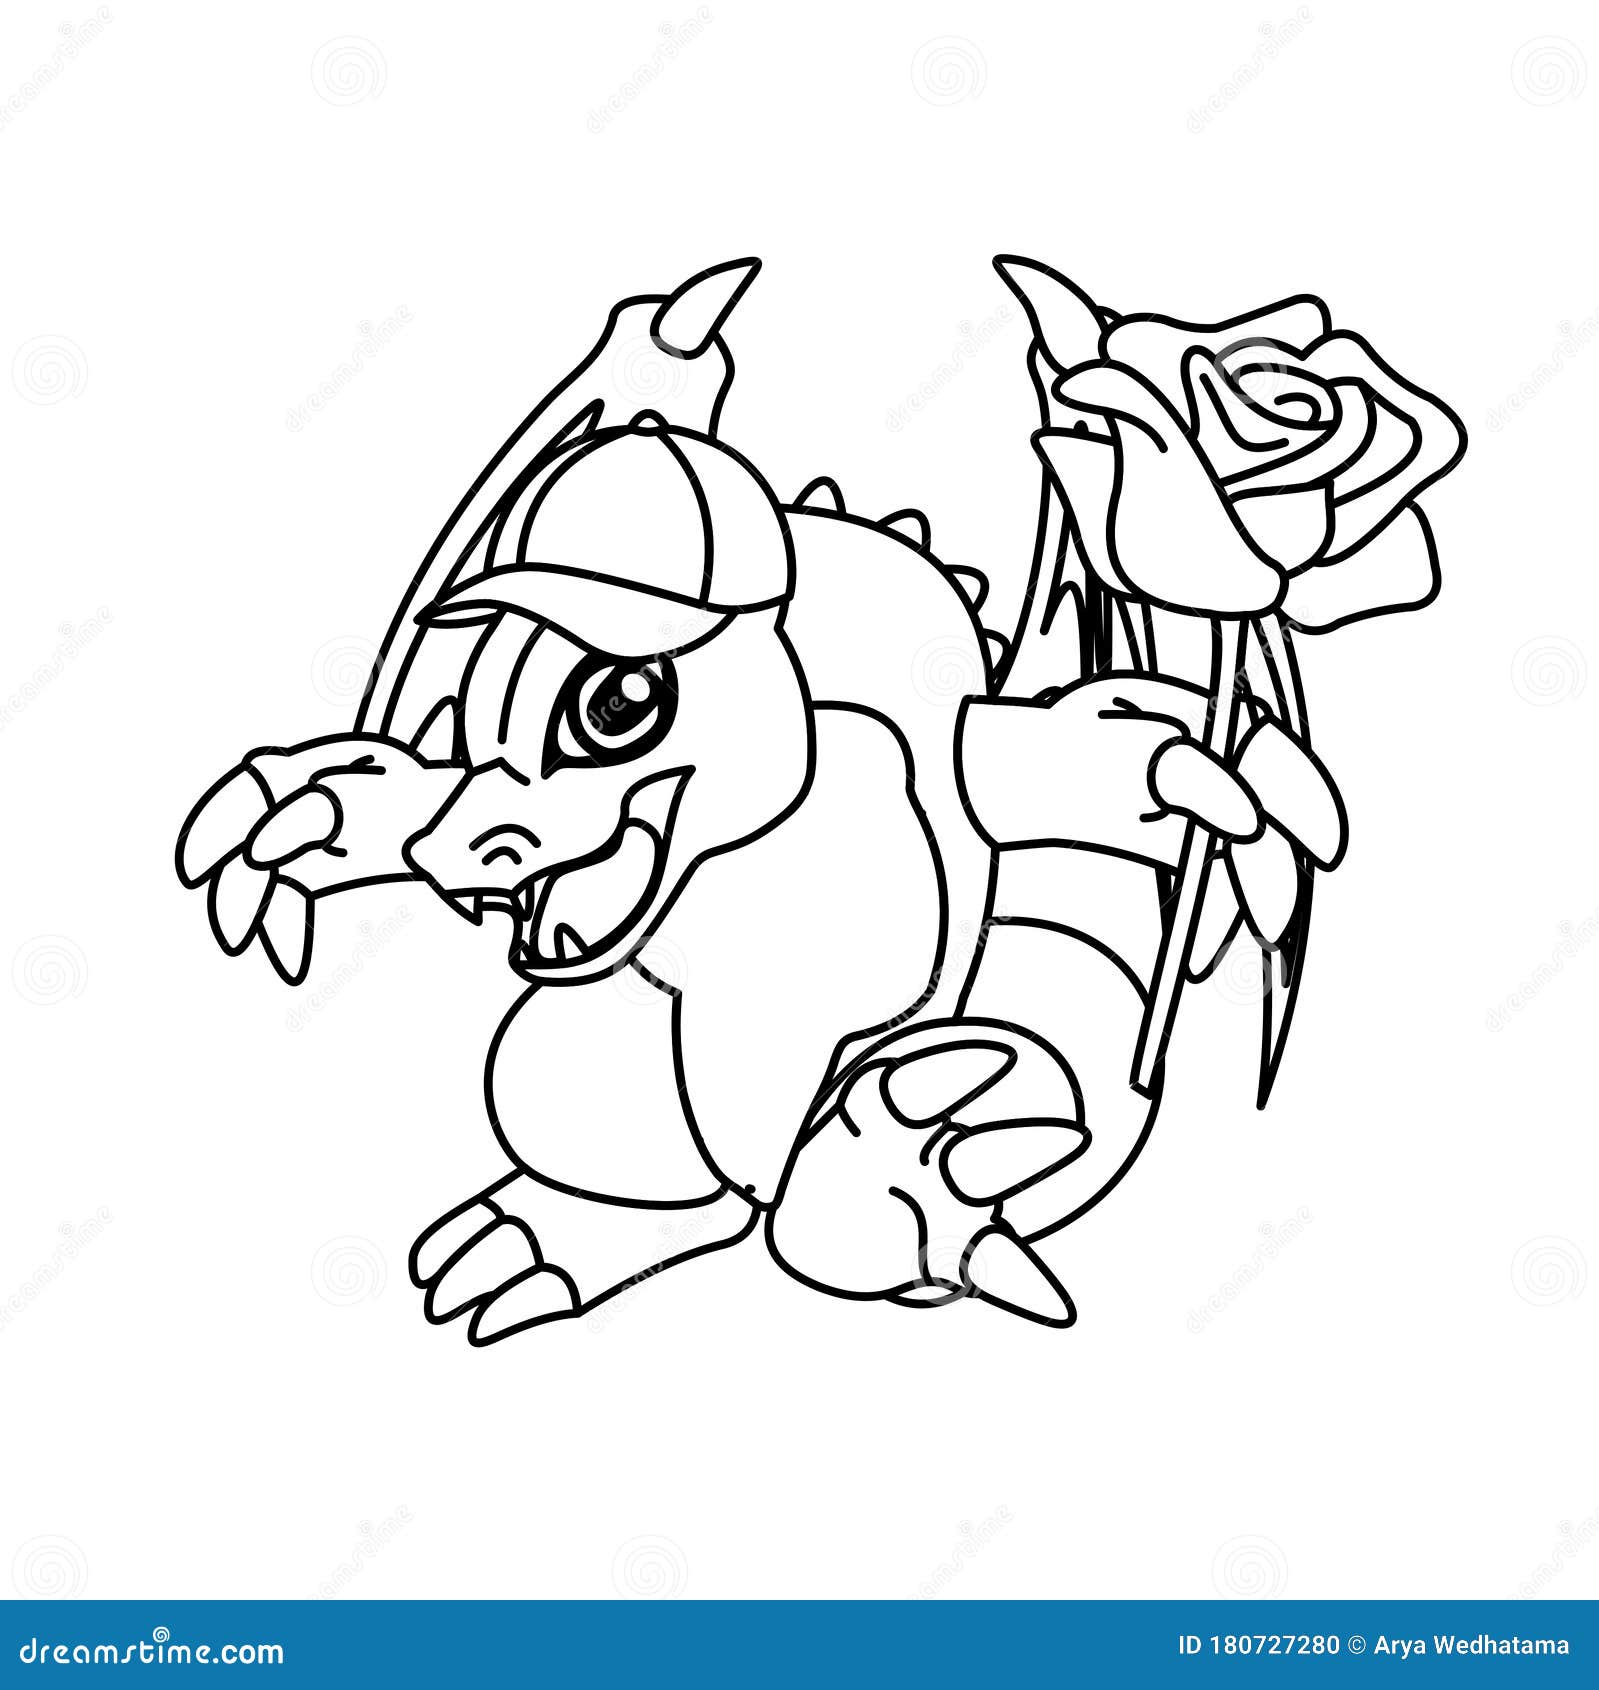 Download Coloring Dragon Wearing A Hat And Carrying Roses Cartoon, Cute Funny Character, Flat Design ...